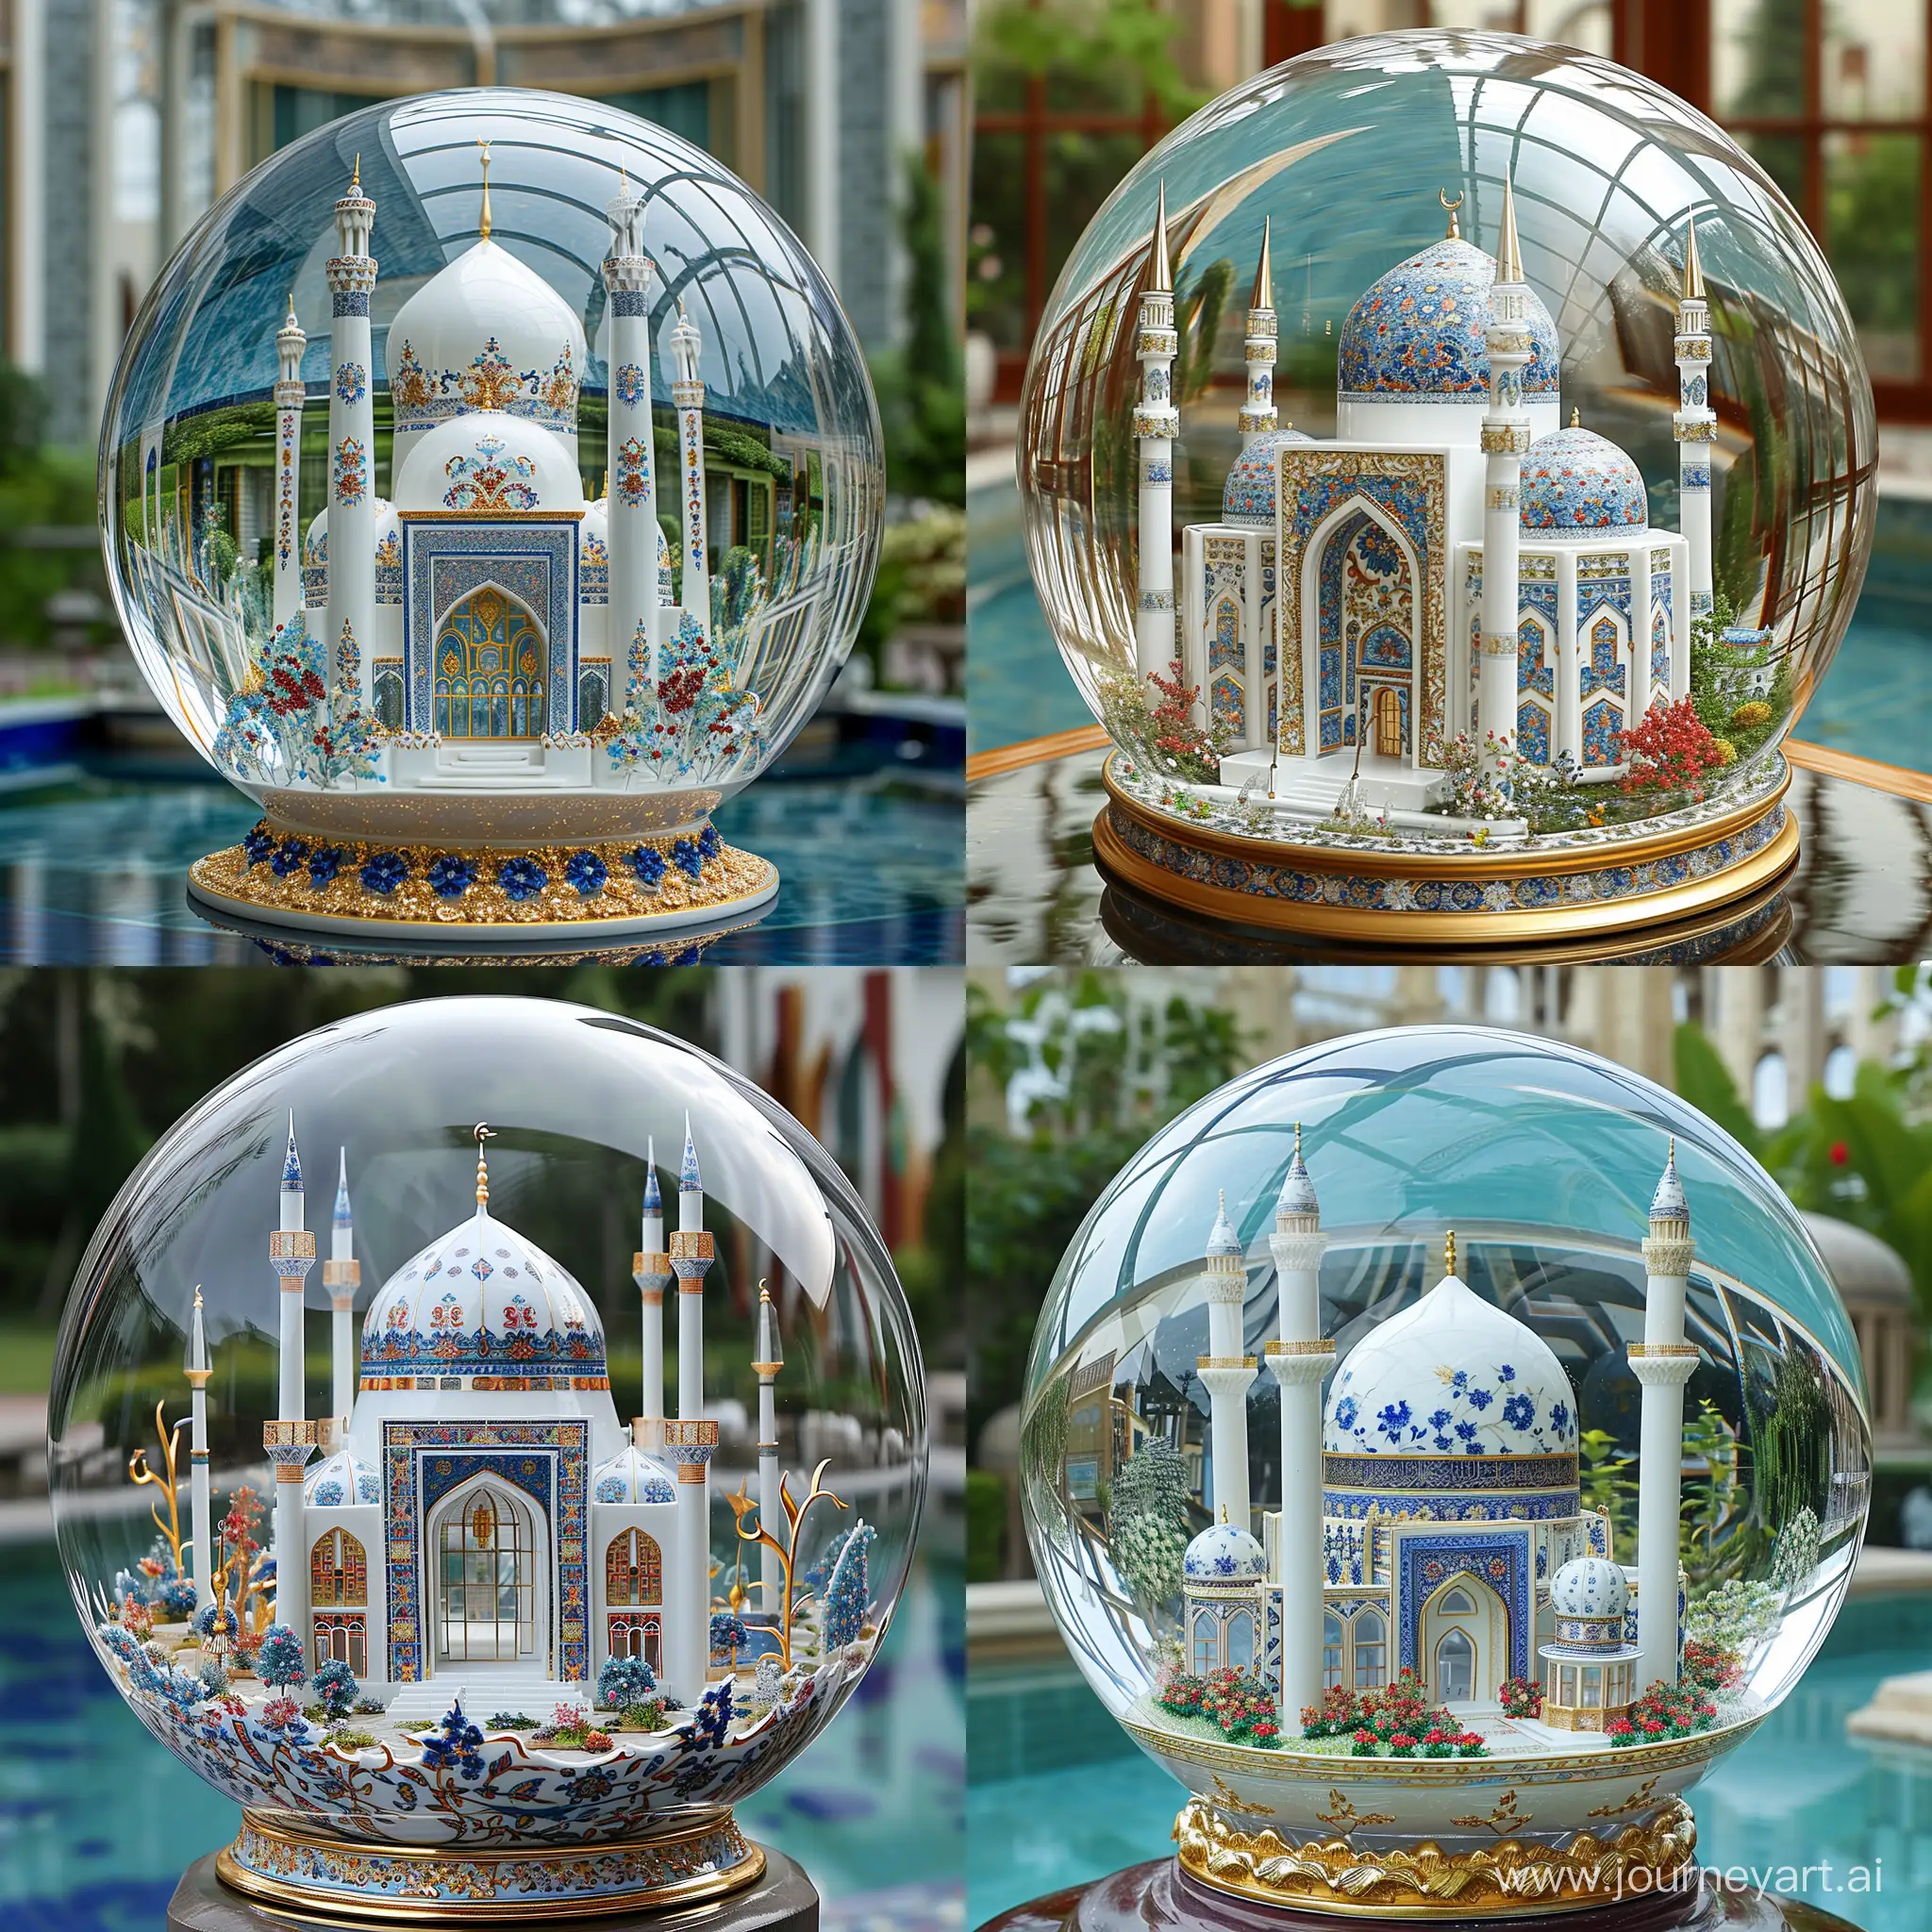 3d porcelain model within a huge crystal ball having golden white blue iznik ceramic style floral base, containing white porcelain model of an Uzbekistan mosque decorated with blue red floral motifs having lustrous golden outlines, tall modern iwan having finely thin blue red floral persian tile motifs with golden outlines, glass windows, mosque, thin decorative minaret spires, surrounded by miniature water pool and garden --v 6